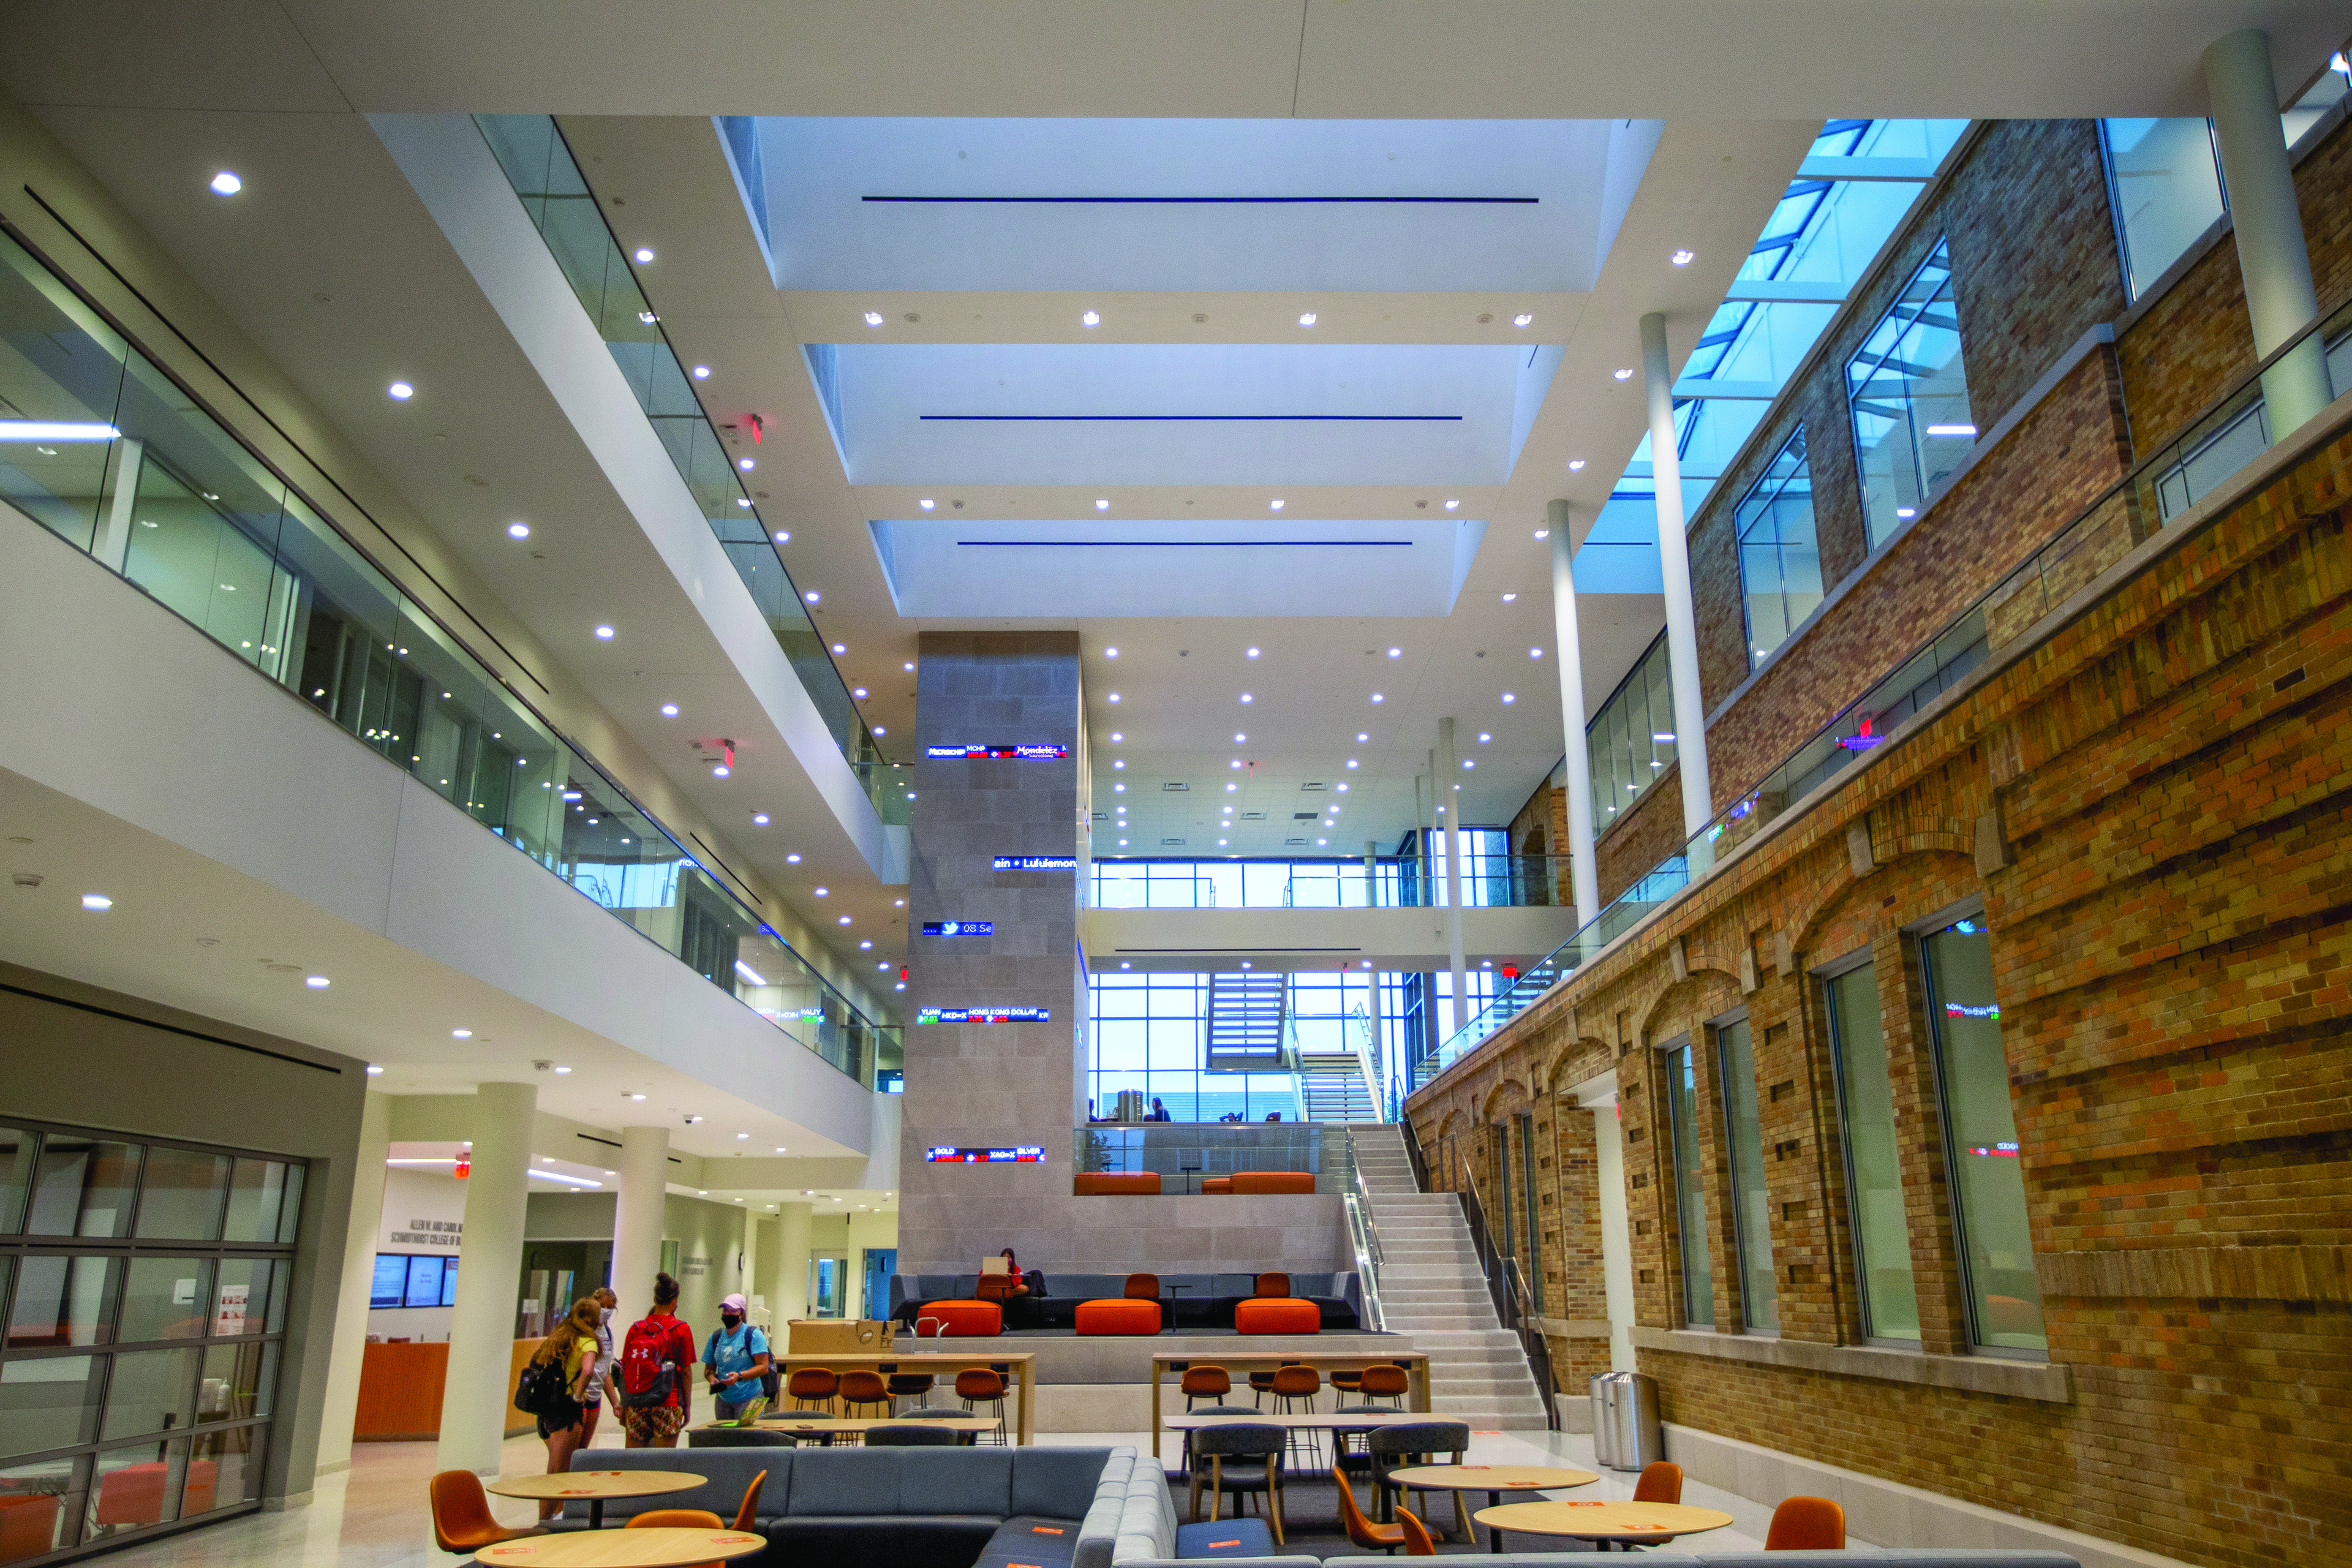 Interior of the Maurer Center, home to the Allen W. and Carol M. Schmidthorst College of Business 